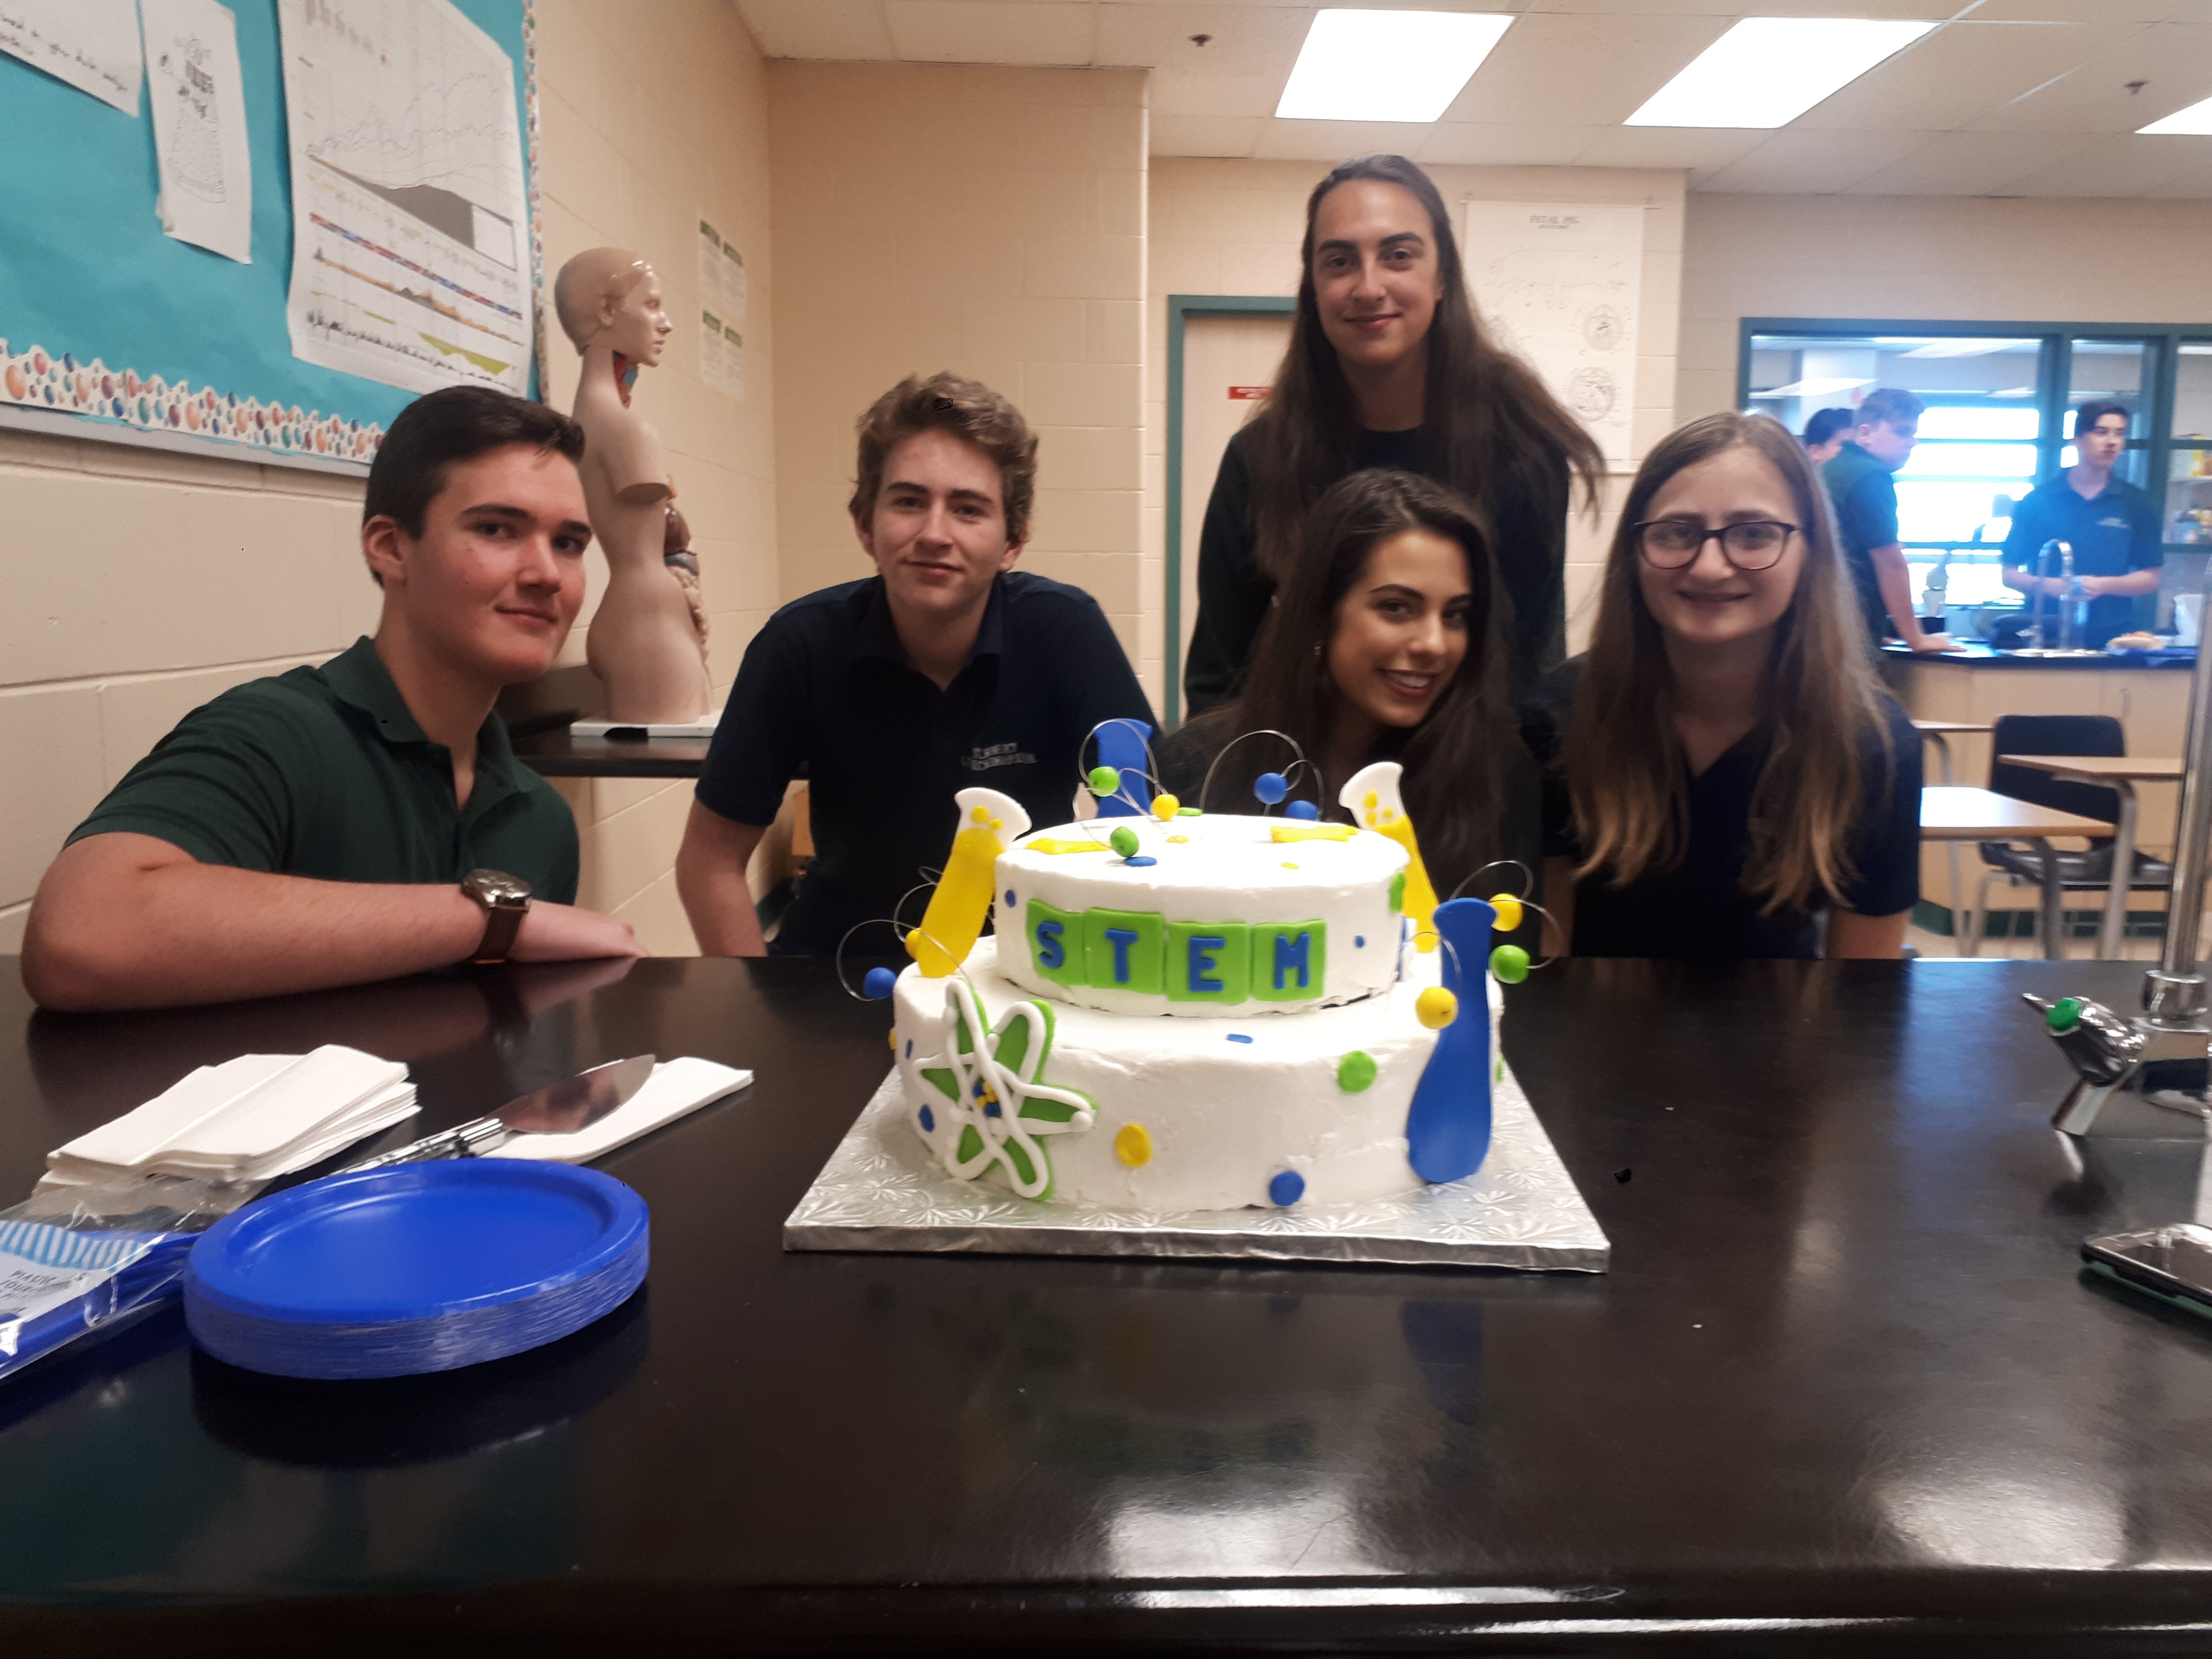 Noah Forteski, Ethan Hodge, Adriana Cimino and Livea Donato with Erika Poirier in the background pose with the STEM Club cake in foreground